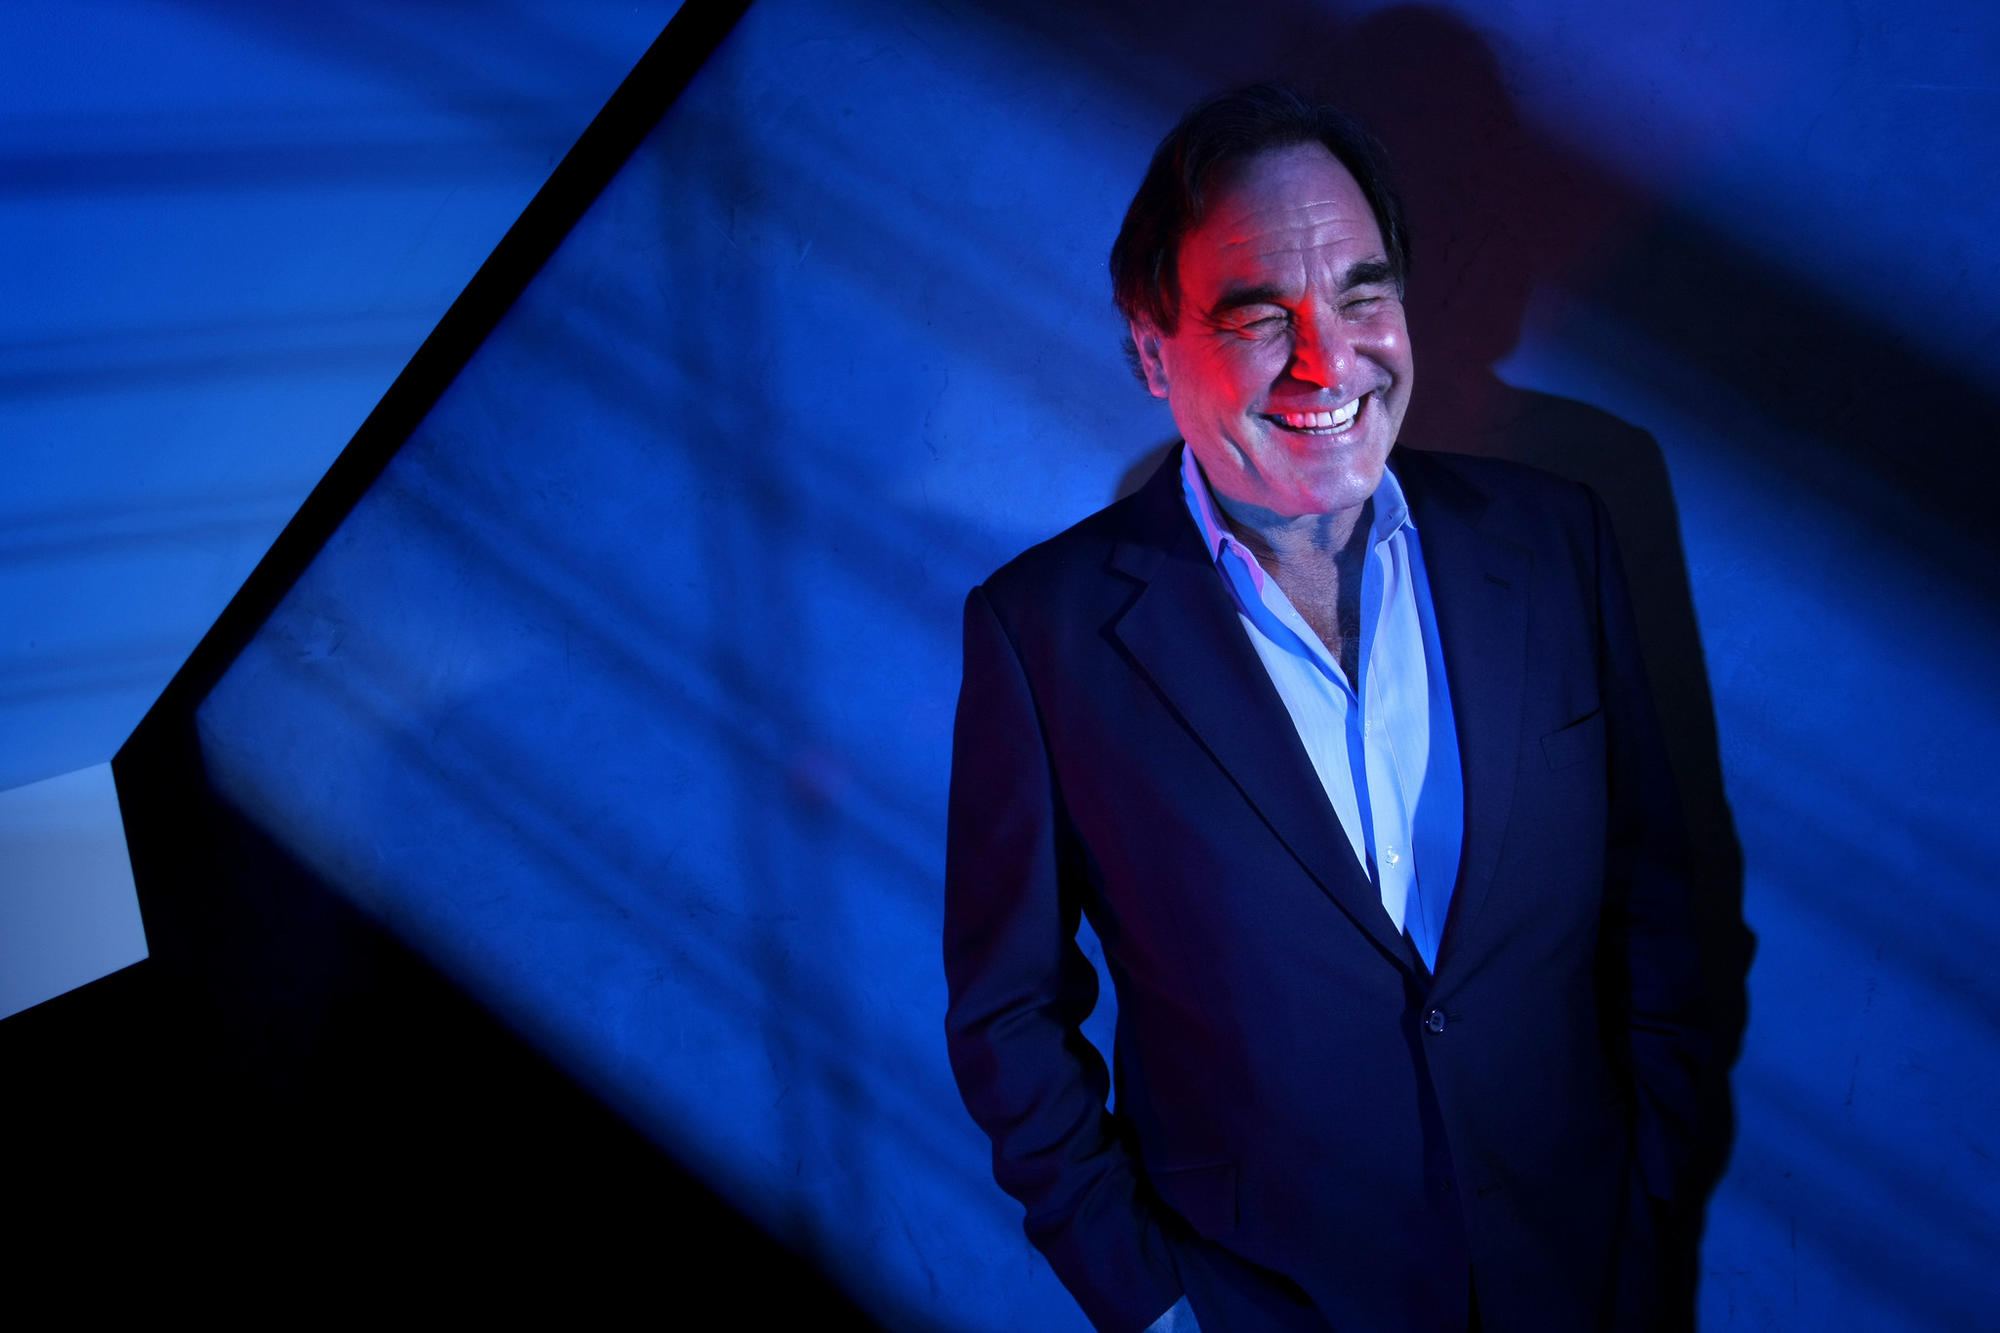 Oliver Stone says he will "recuse" himself from "Guantanamo" if Weinstein Co. is involved.